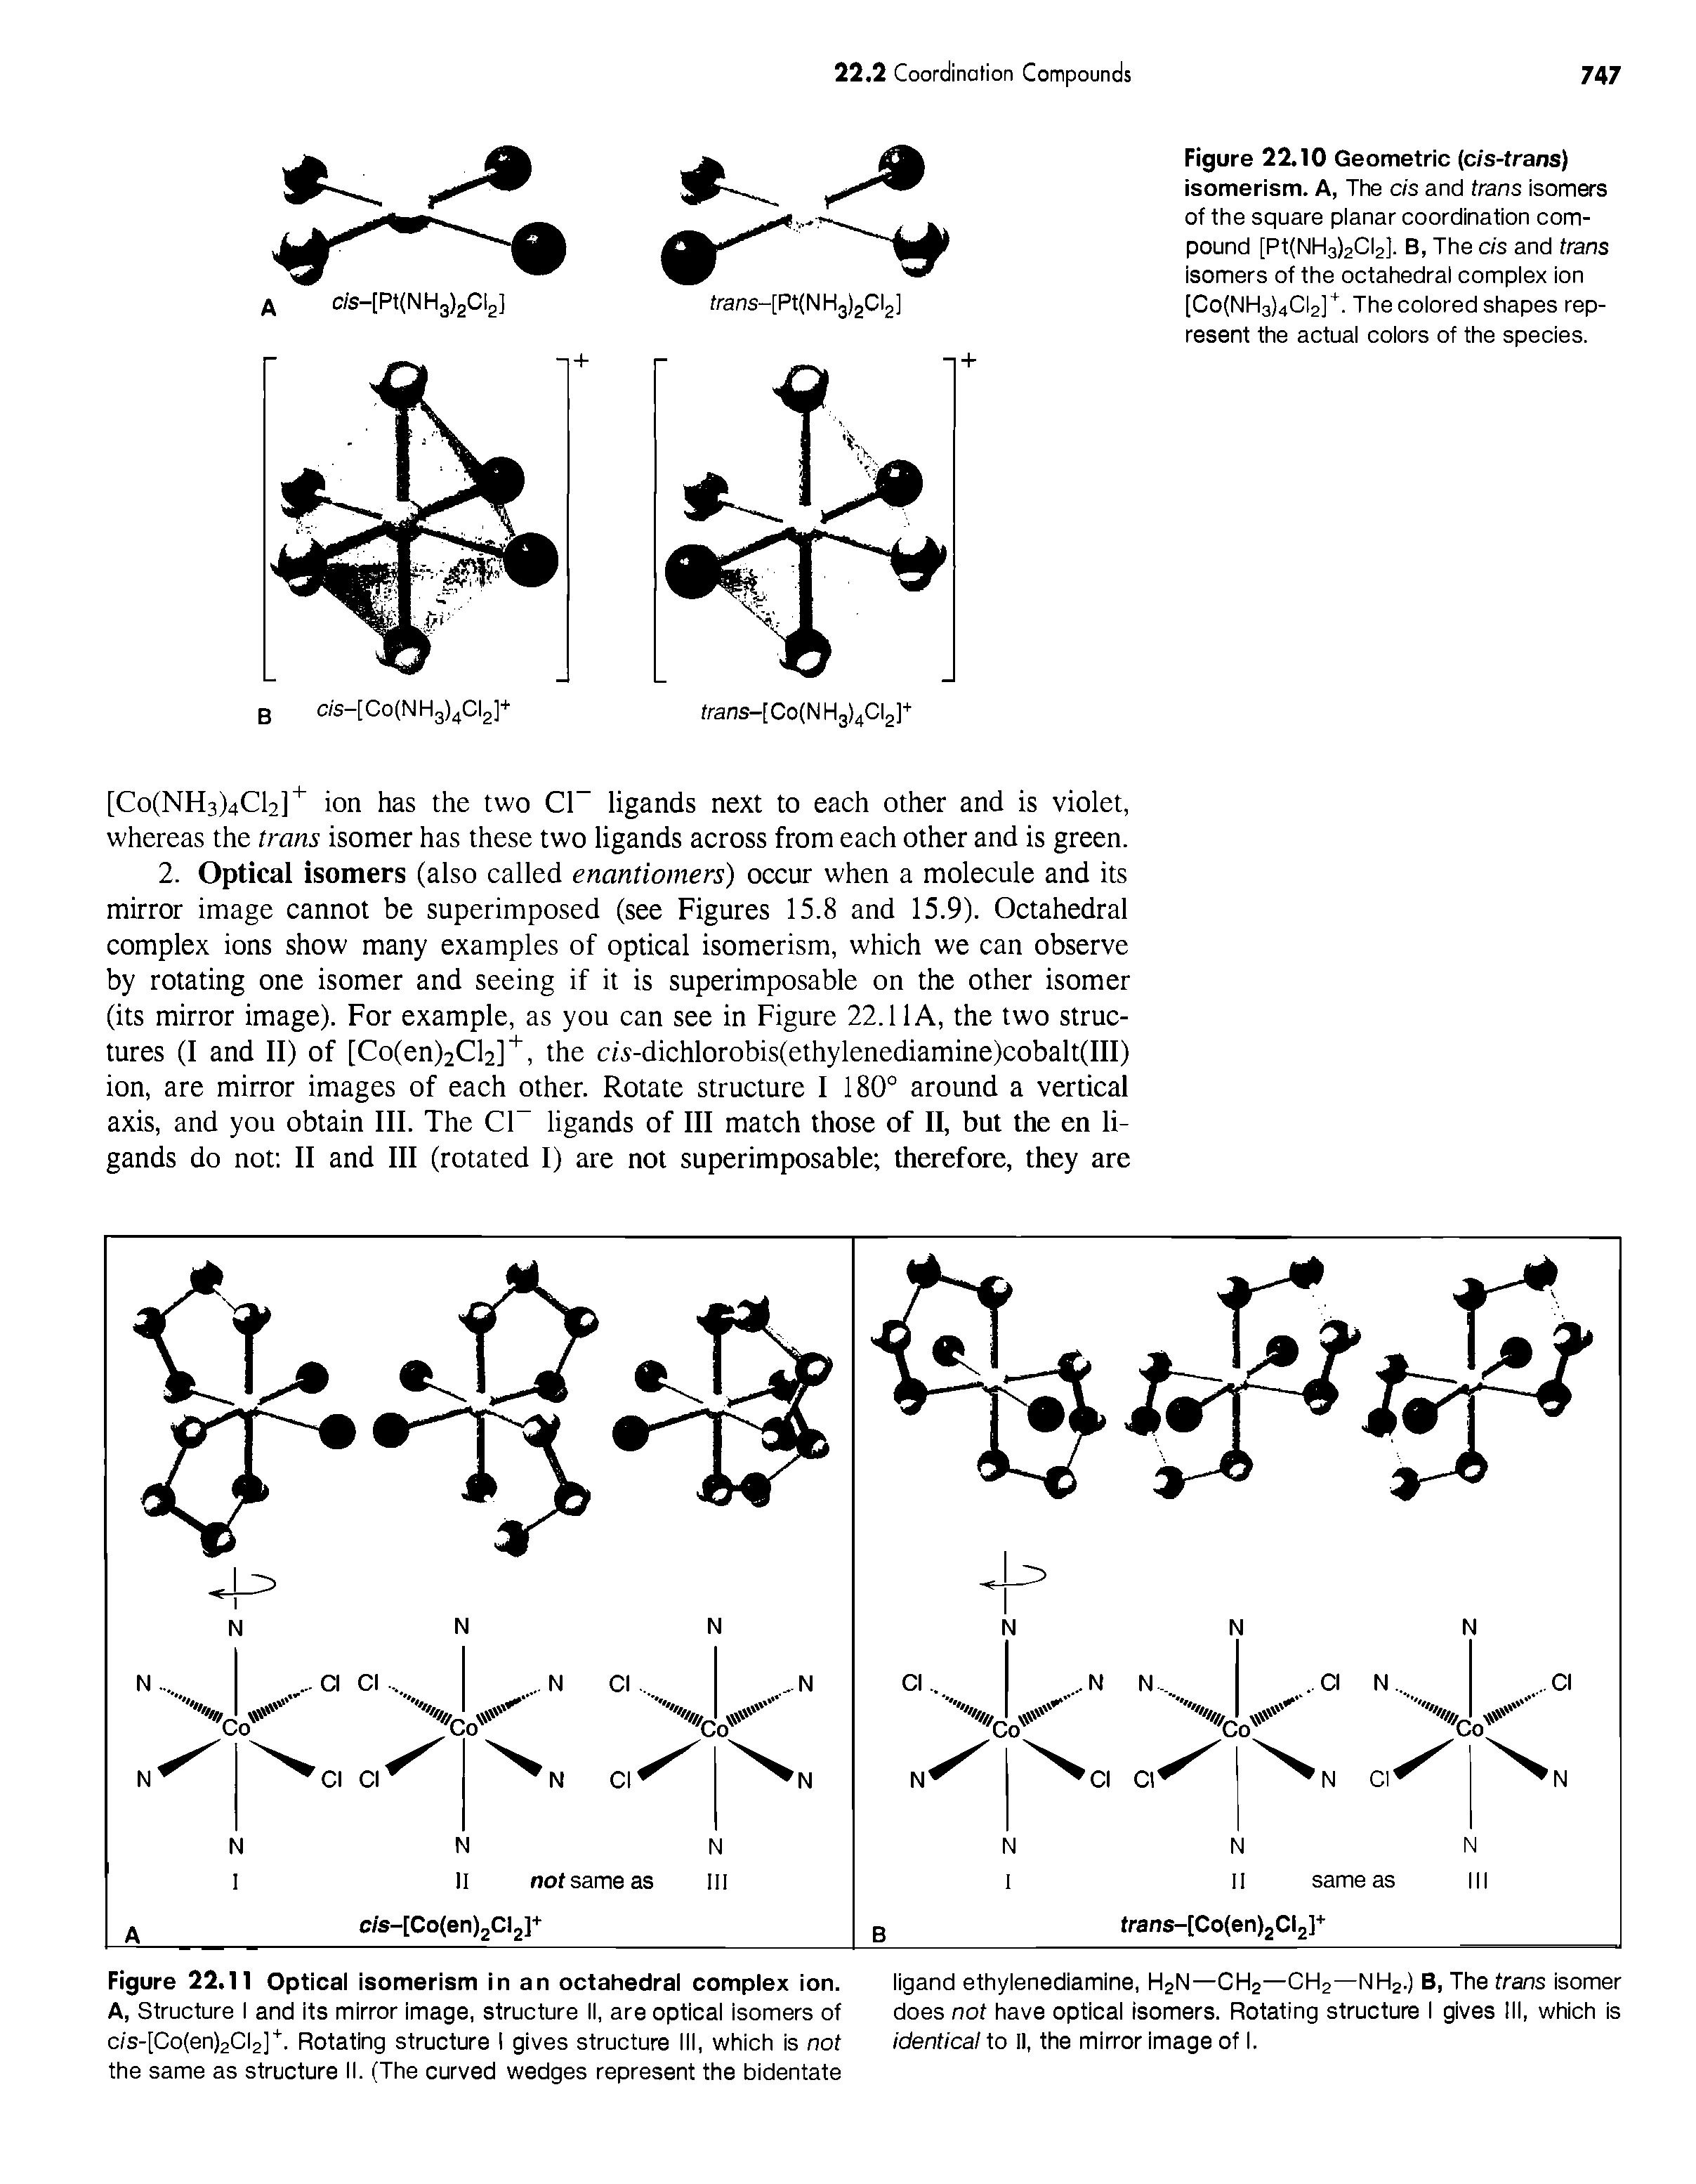 Figure 22.10 Geometric (cis-trans) isomerism. A, The c/s and trans isomers of the square planar coordination compound [Pt(NH3)2Cl2]. B, The c/s and trans isomers of the octahedral complex Ion [Co(NH3)4Cl2]. The colored shapes represent the actual colors of the species.